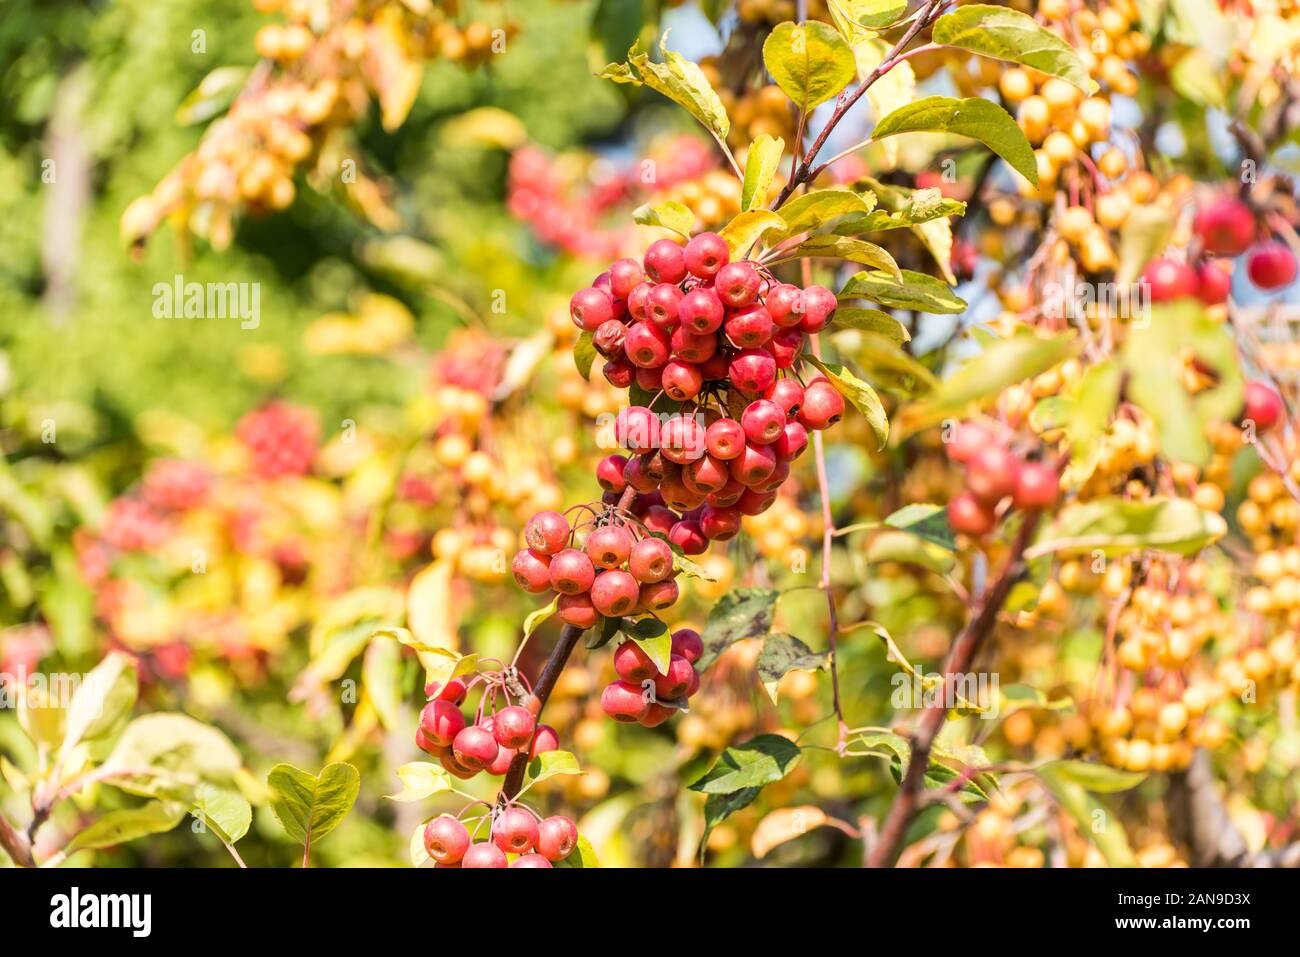 Red fruits of Pyracantha crenatoserrata, a species of Firethorn. It is a short shrub. It is cultivated for its decorative bright red pome fruit Stock Photo